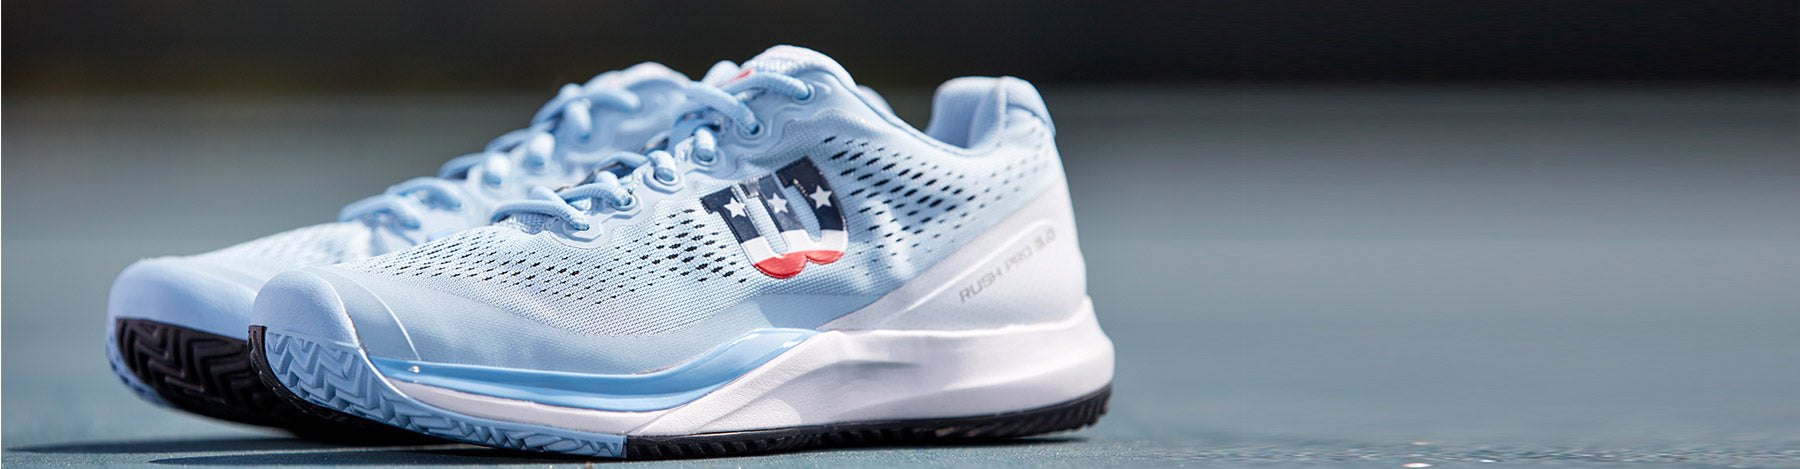 Wilson Rush Pro 3.0 Women's Chambry Blue/White/Outer Space pickleball shoes on a light blue outdoor court.